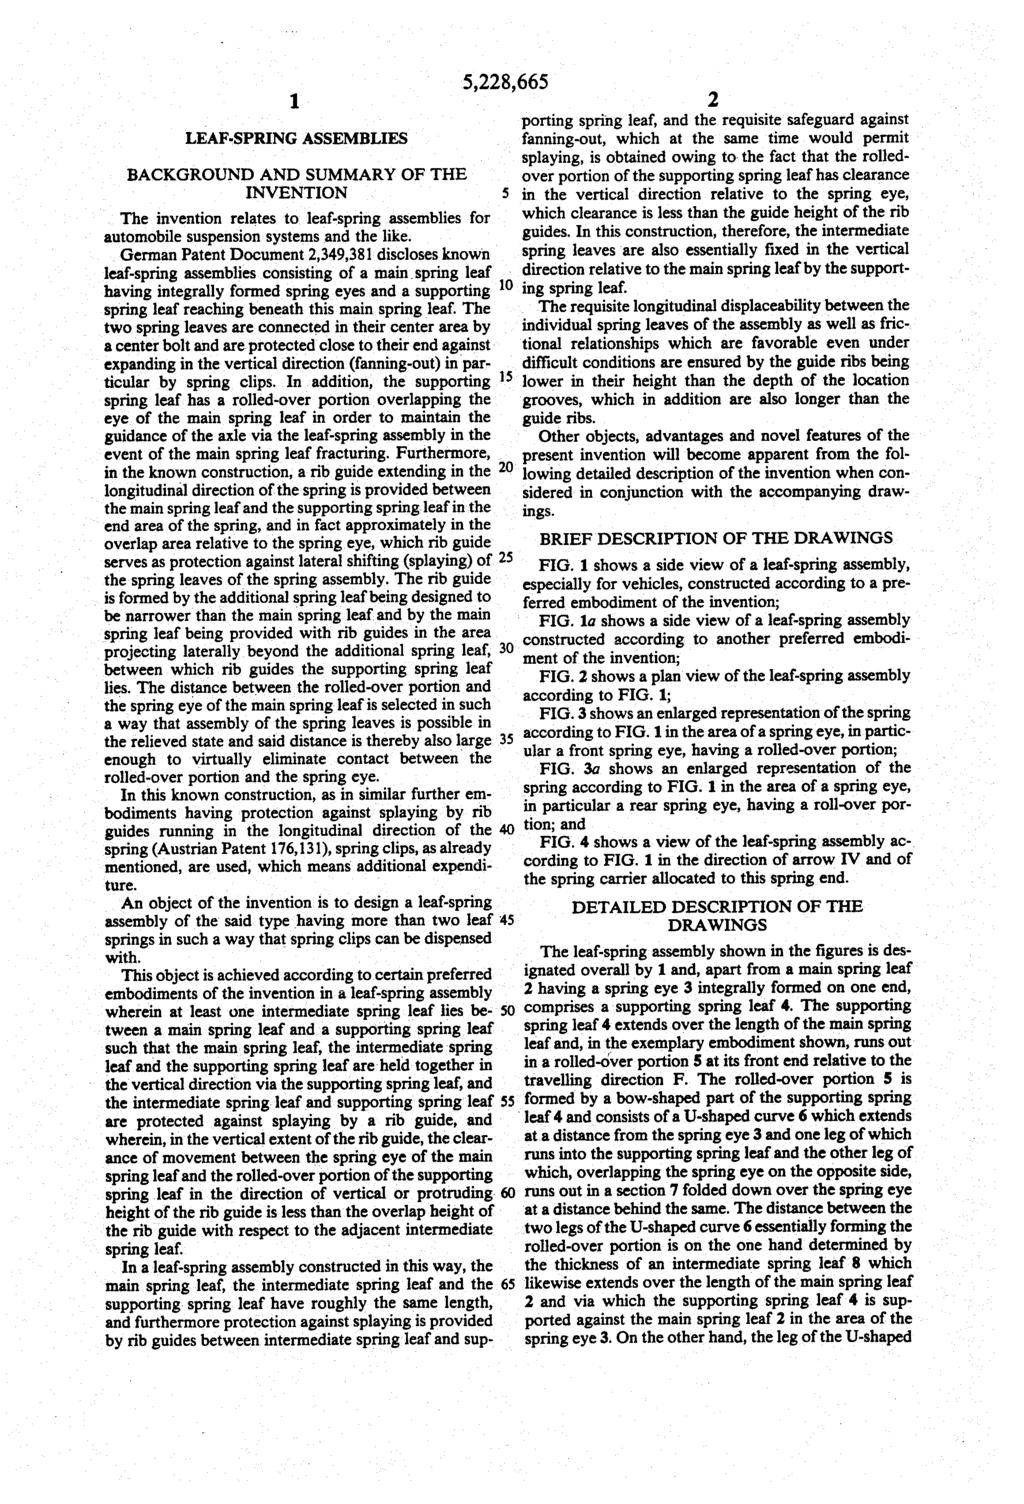 1 LEAF-SPRING ASSEMBLIES BACKGROUND AND SUMMARY OF THE INVENTION 5 The invention relates to leaf-spring assemblies for automobile suspension systems and the like.